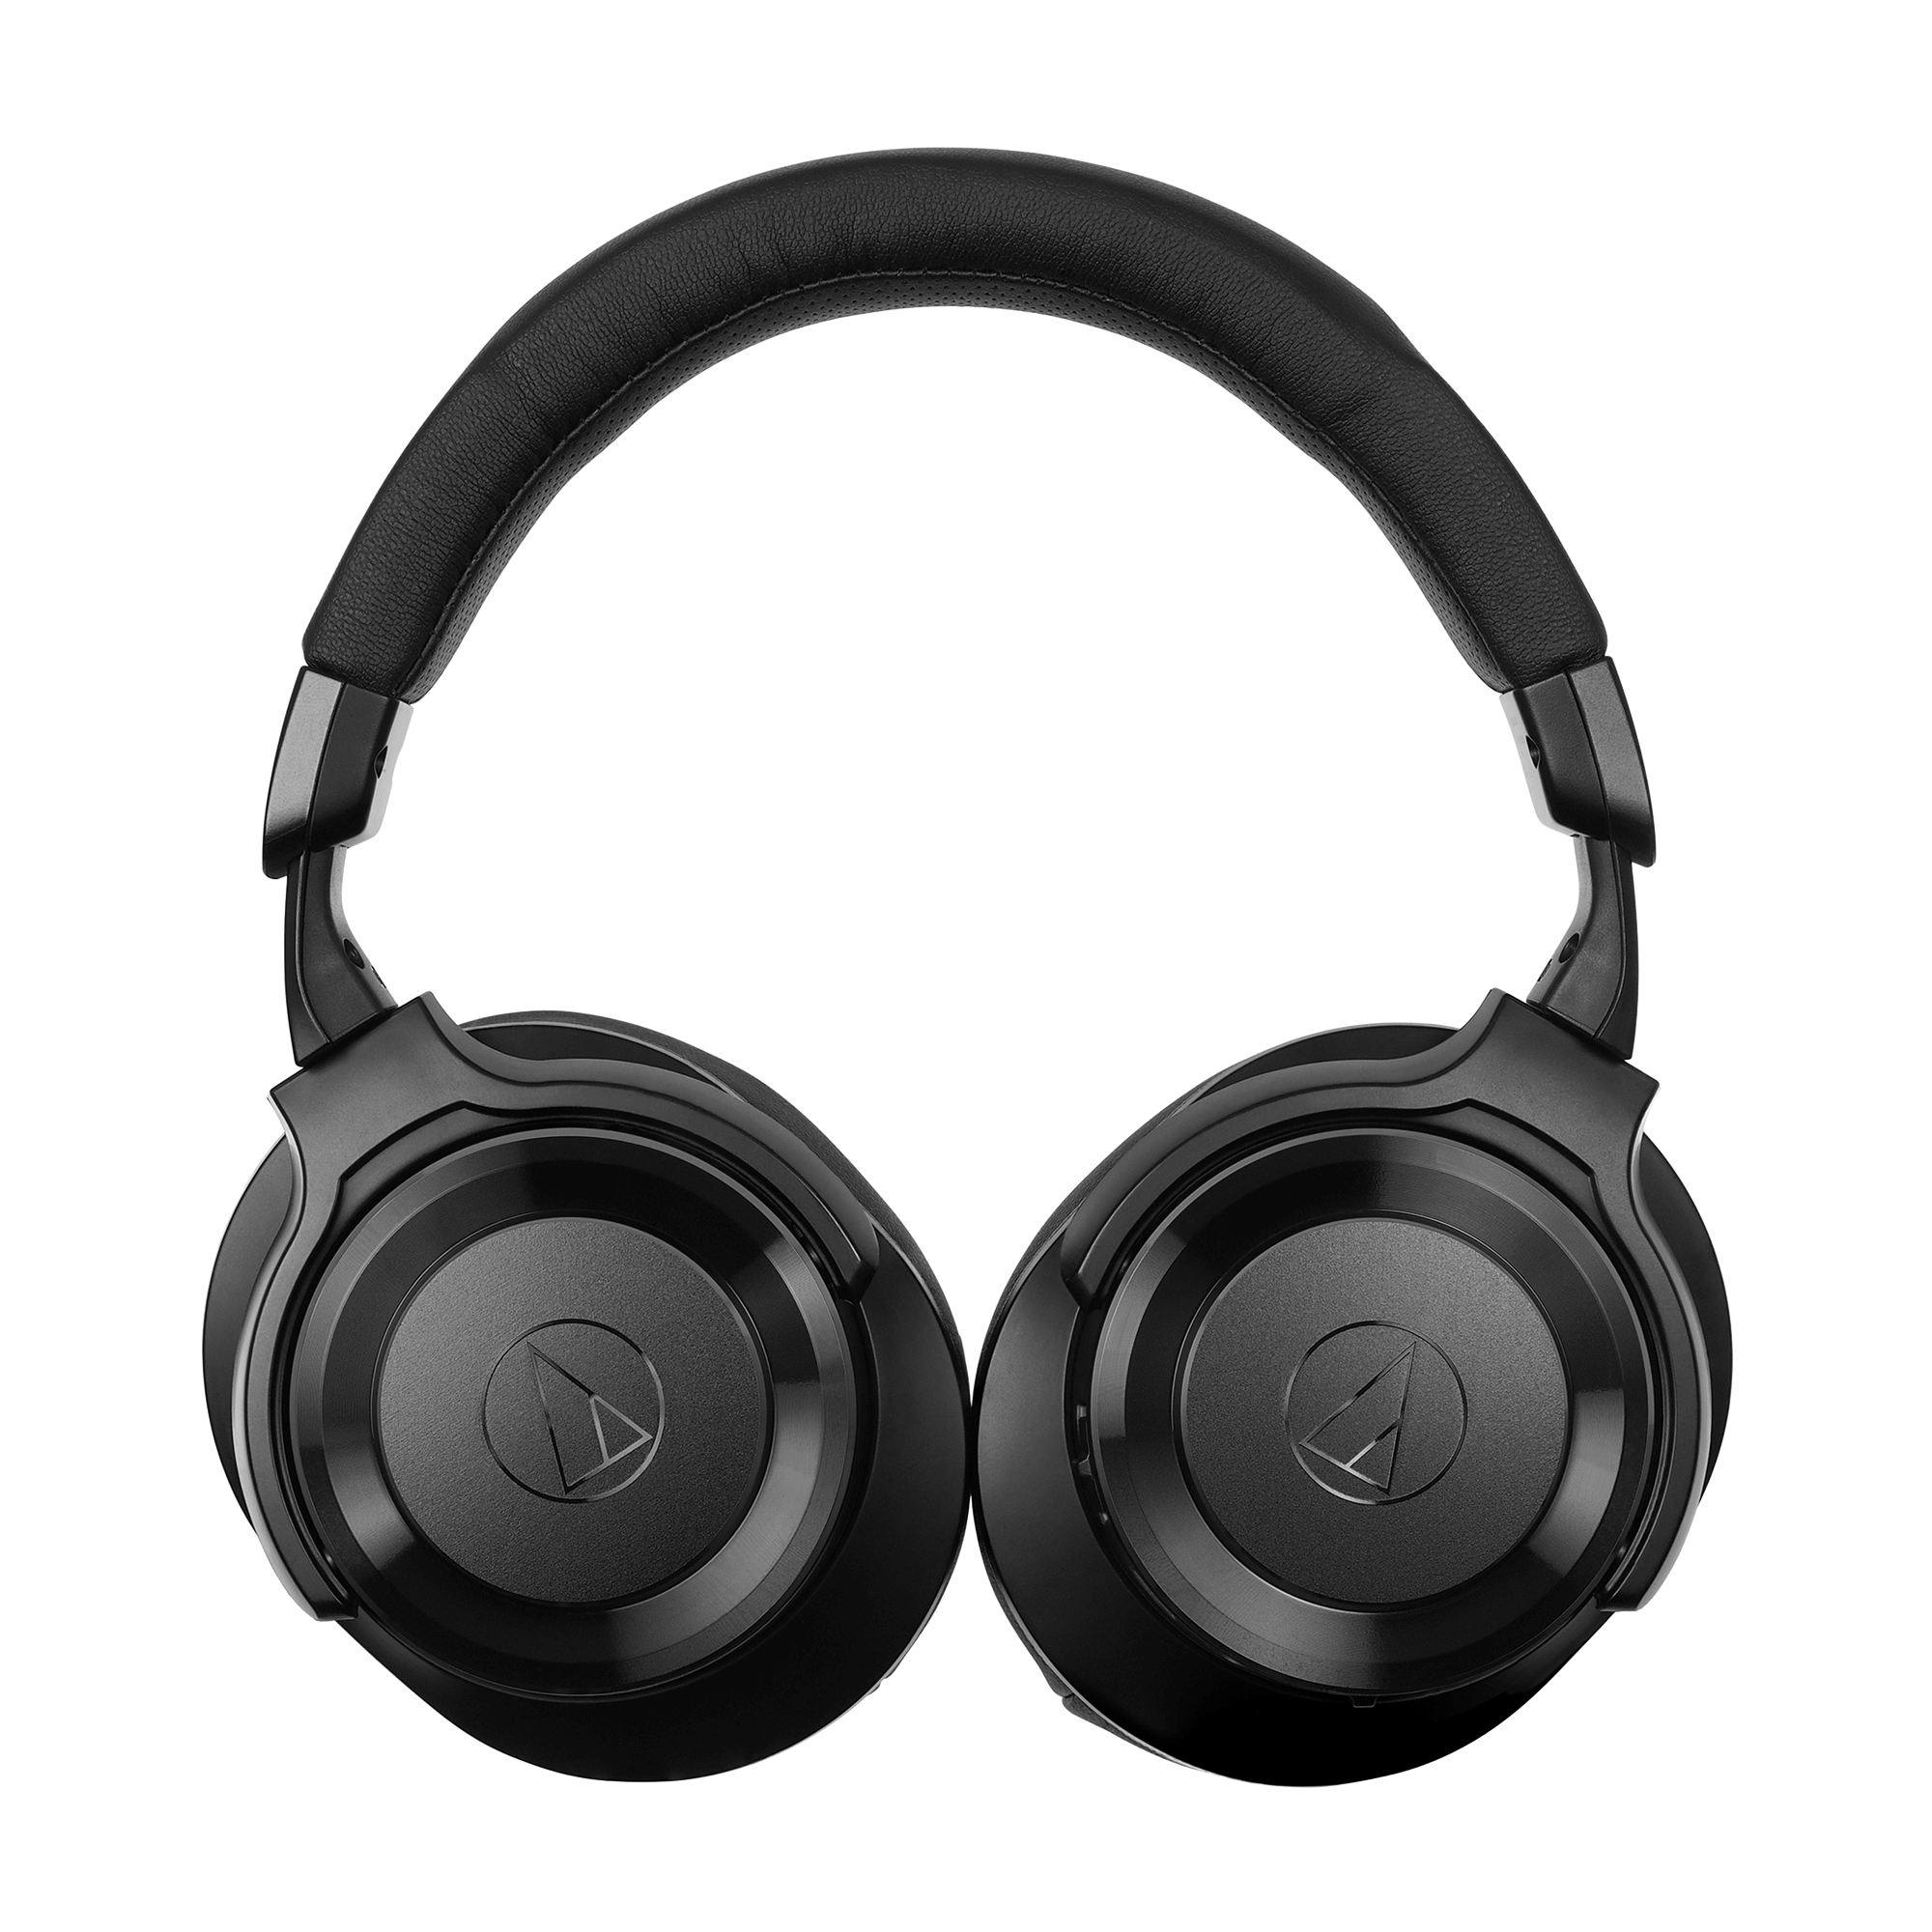 Audio-Technica Bluetooth Noise-Canceling Over-Ear Headphones, Black, ATH-WS990BT - image 3 of 5